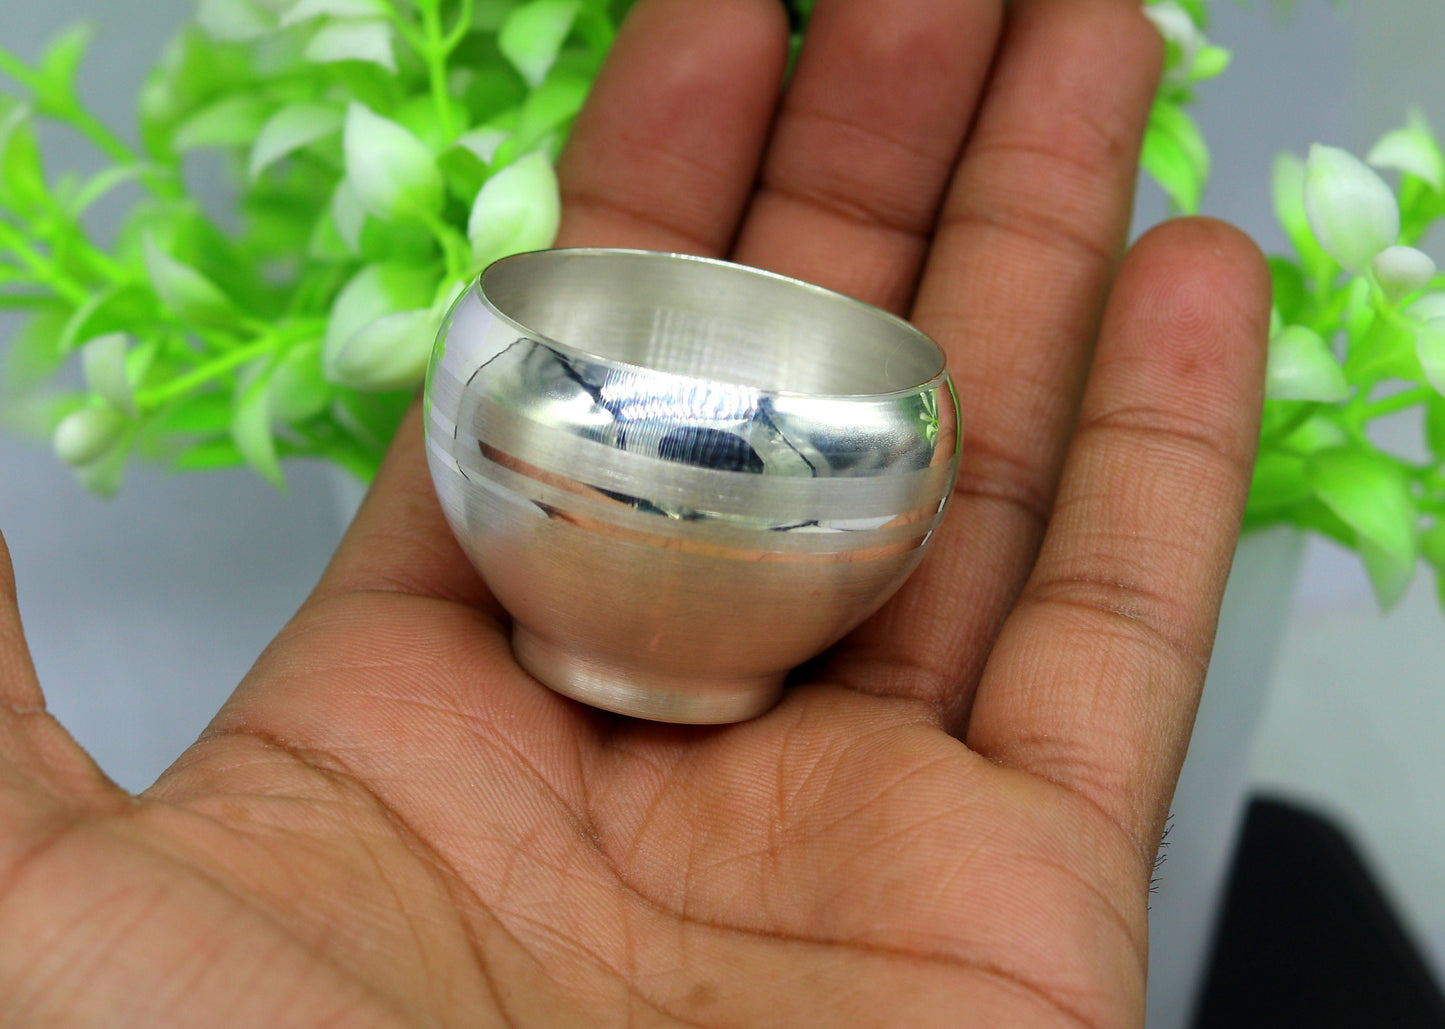 999 fine silver handmade small silver utensils bowl/tumbler silver vessel, silver article puja art accessories, healthy family gift sv259 - TRIBAL ORNAMENTS